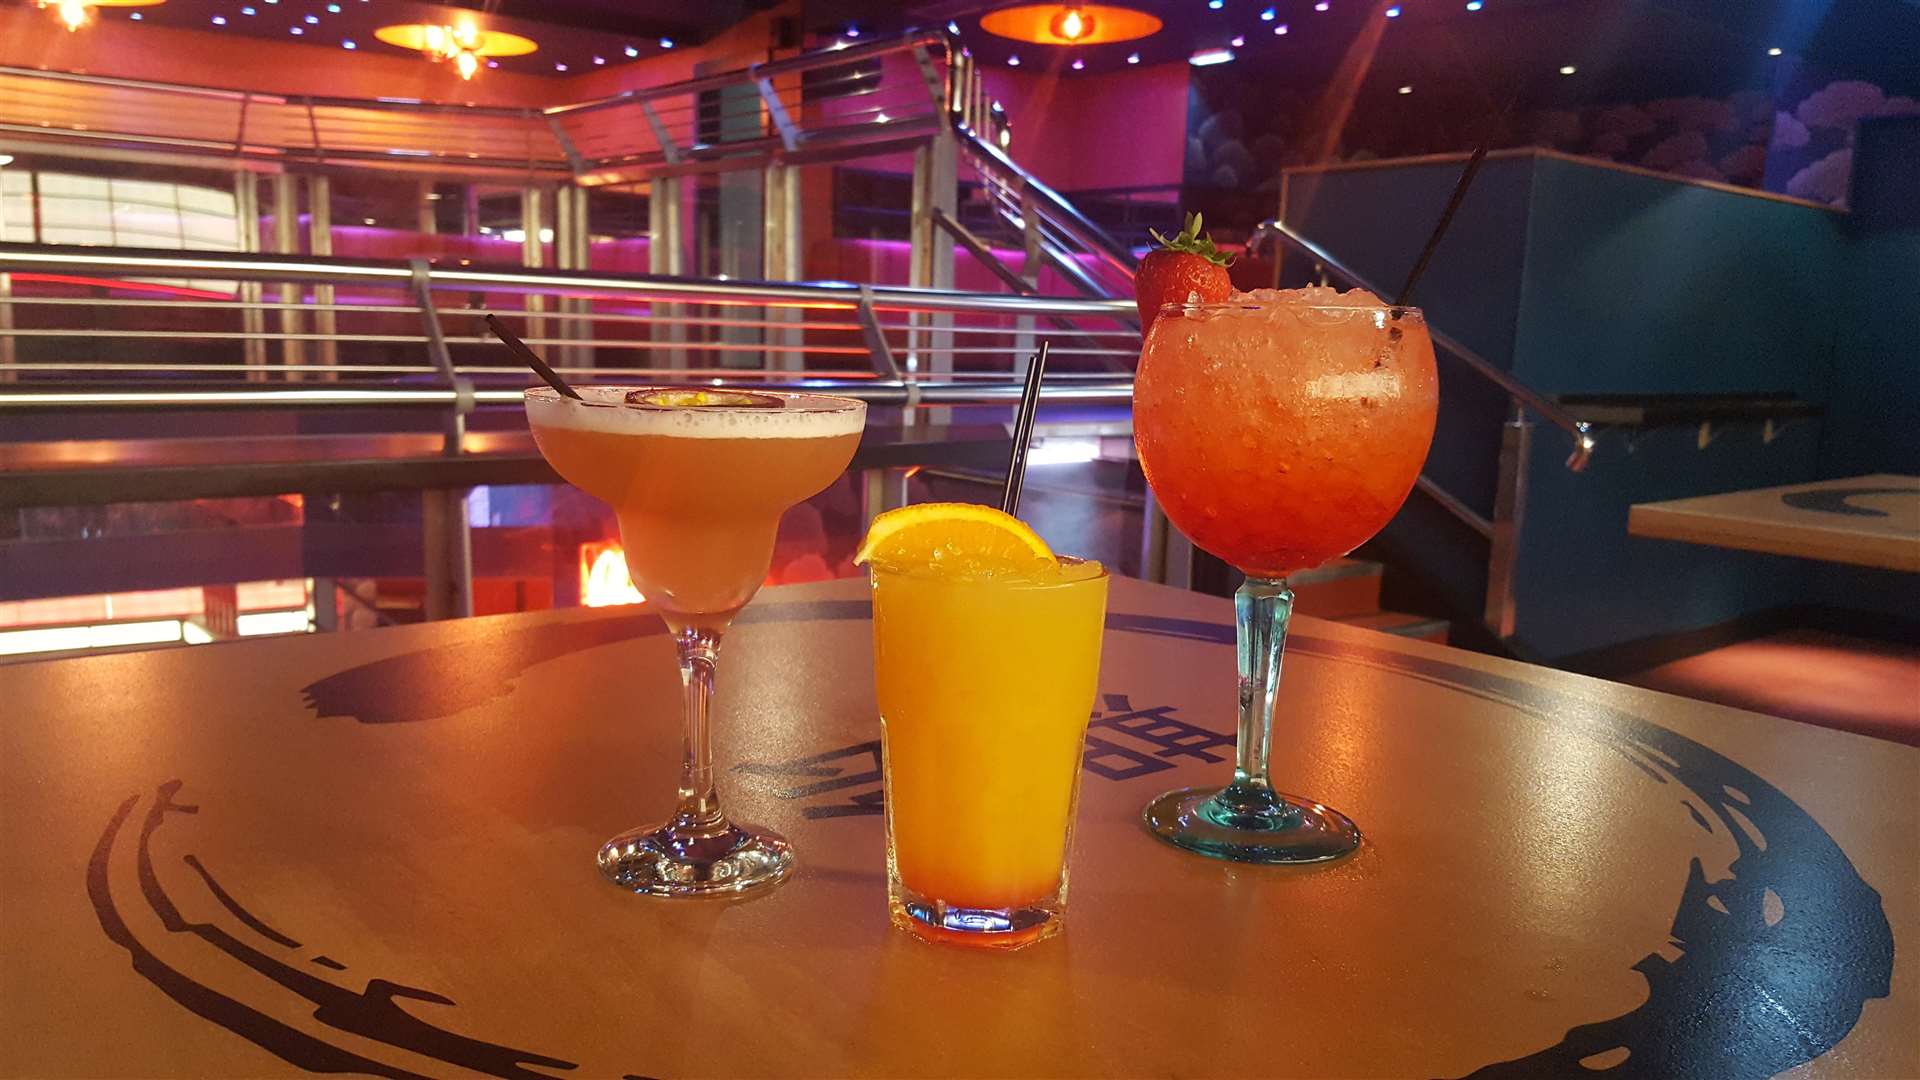 Cocktails with a Japanese twist will be the bar's speciality